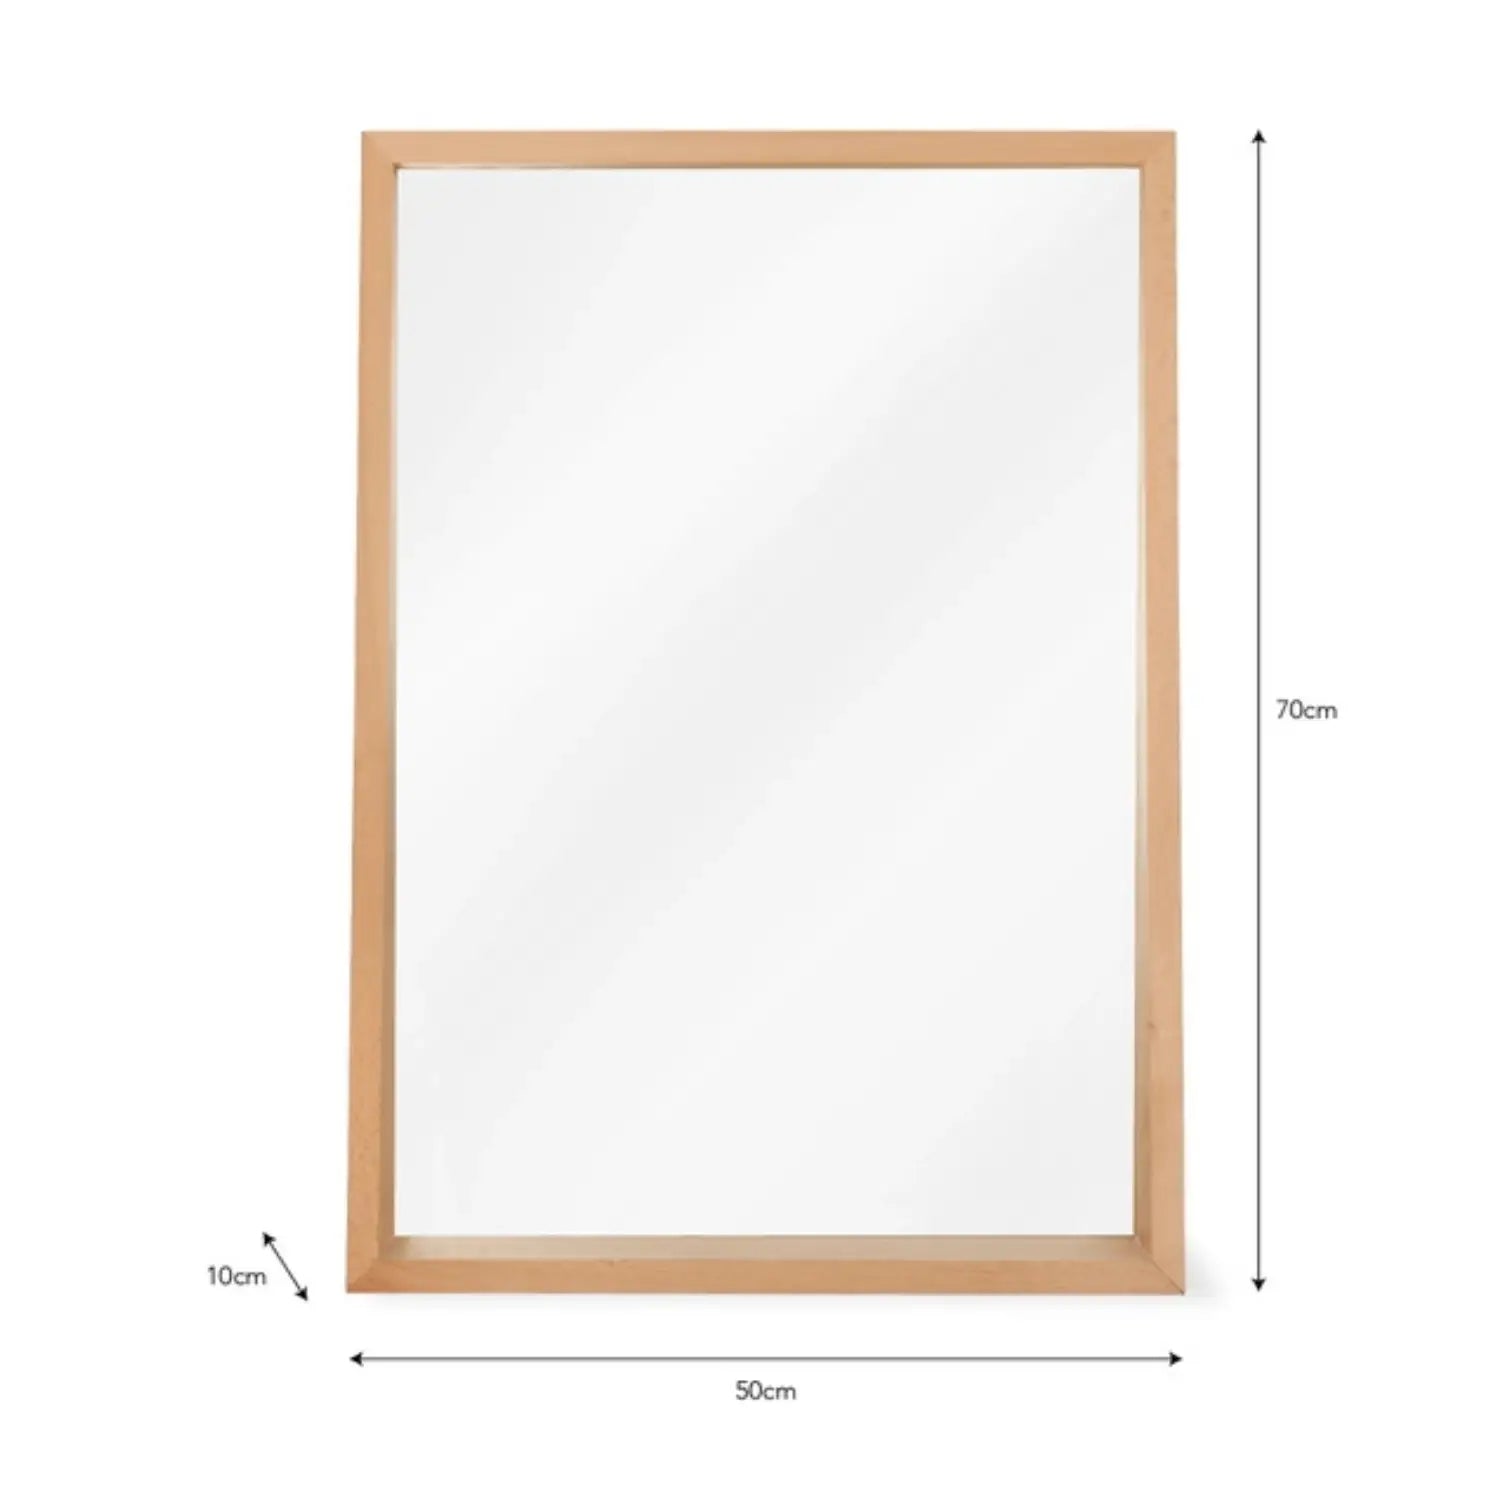 Southbourne Wall Mirror by Garden Trading - Beech